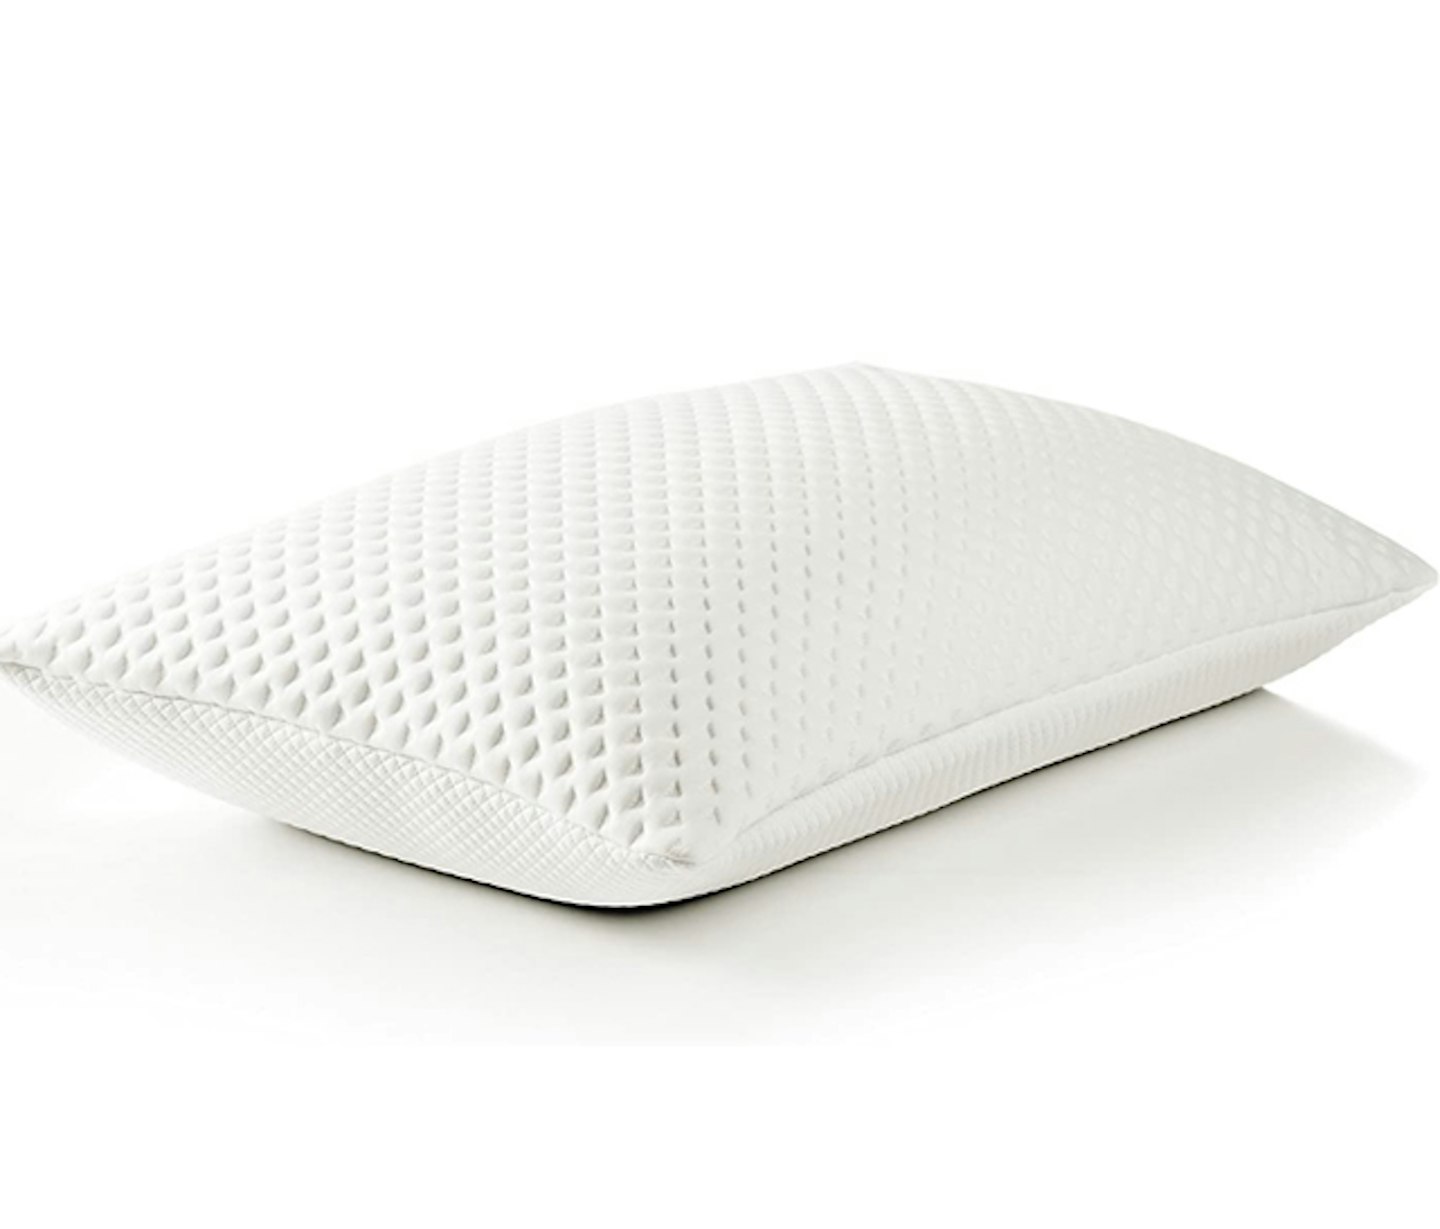 The best pillows for neck pain: Tempur